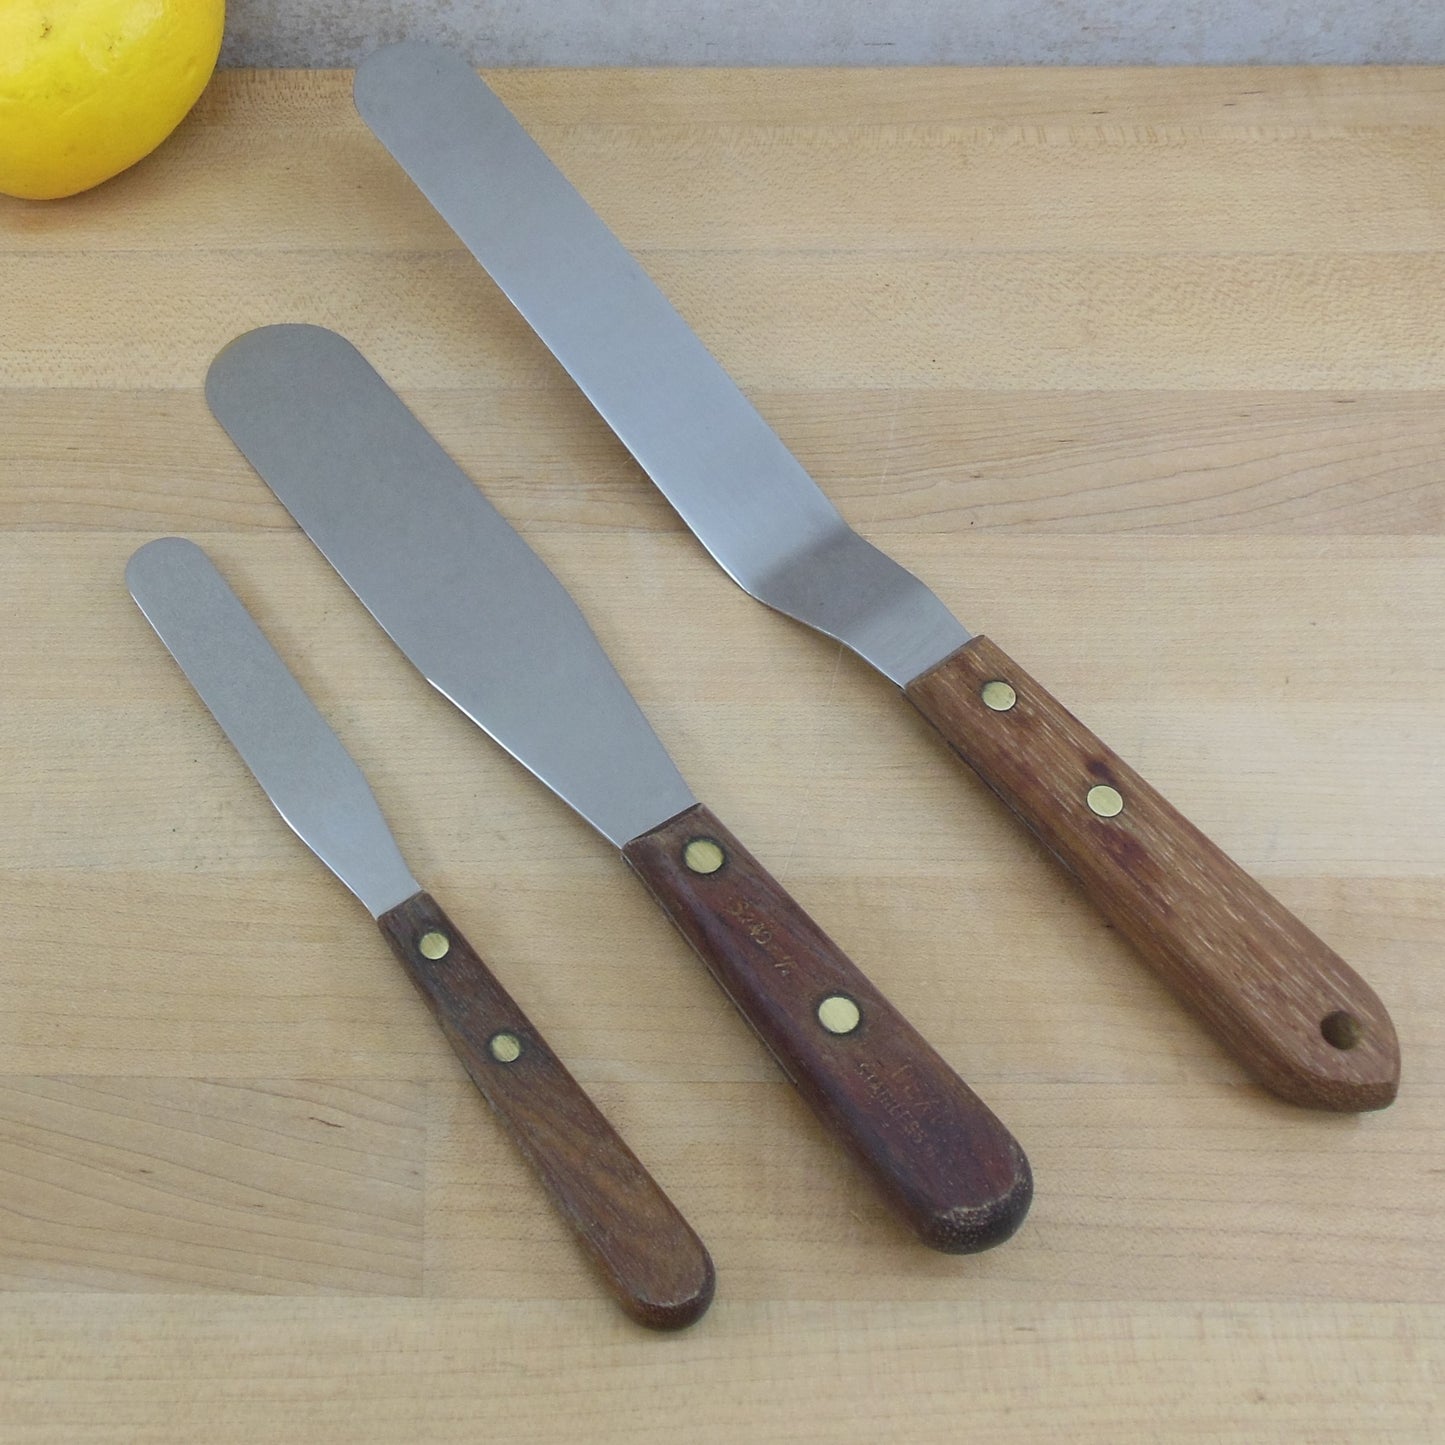 3 Lot Stainless Wood Handle Baker's Icing Spatula Knife Dexter CK